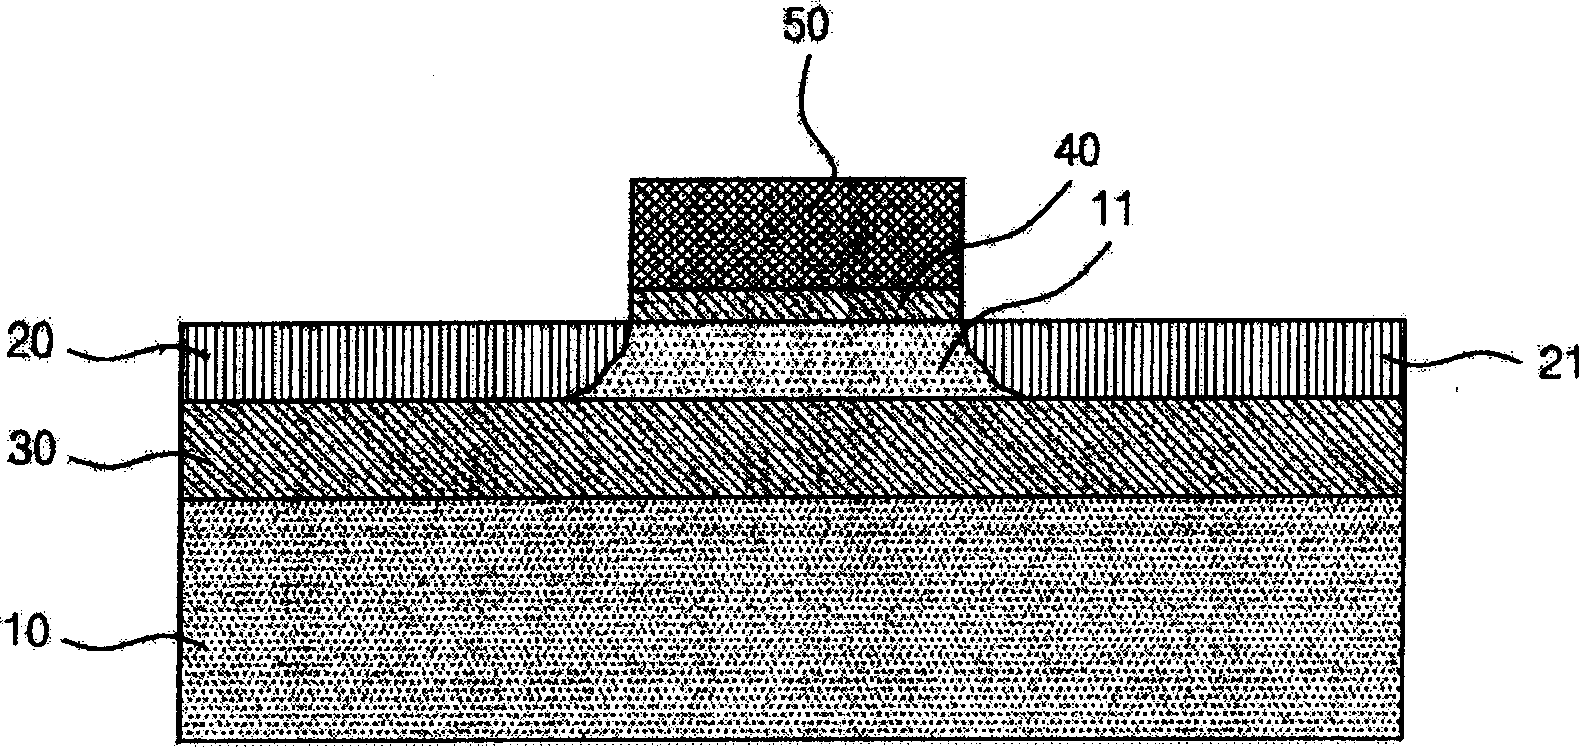 Silicon-on-nothing metal-oxide-semiconductor field-effect-transistor and method for manufacturing the same